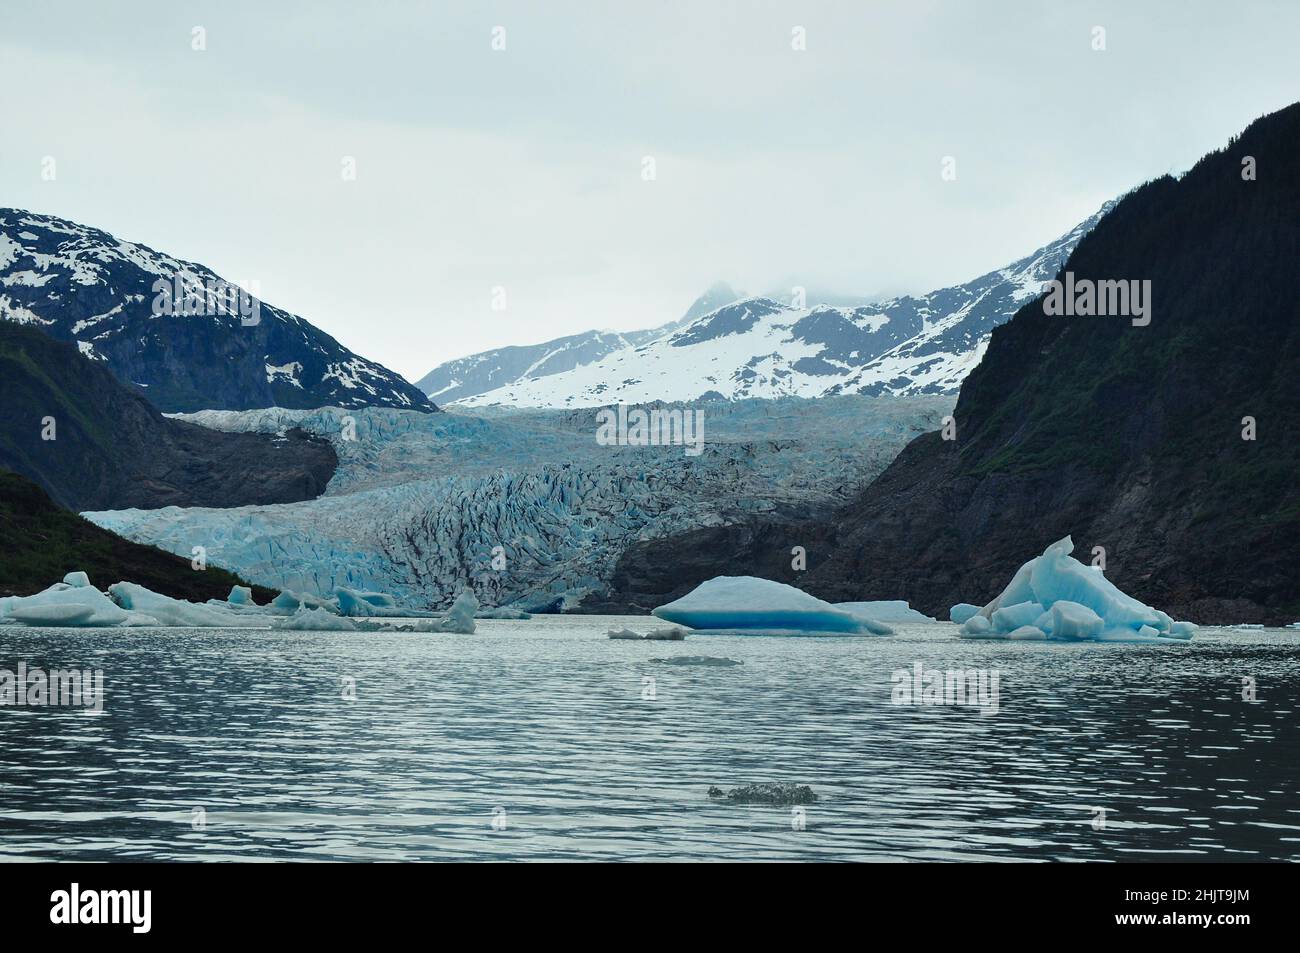 View of Mendenhall glacier in Juneau Icefield, Alaska Stock Photo